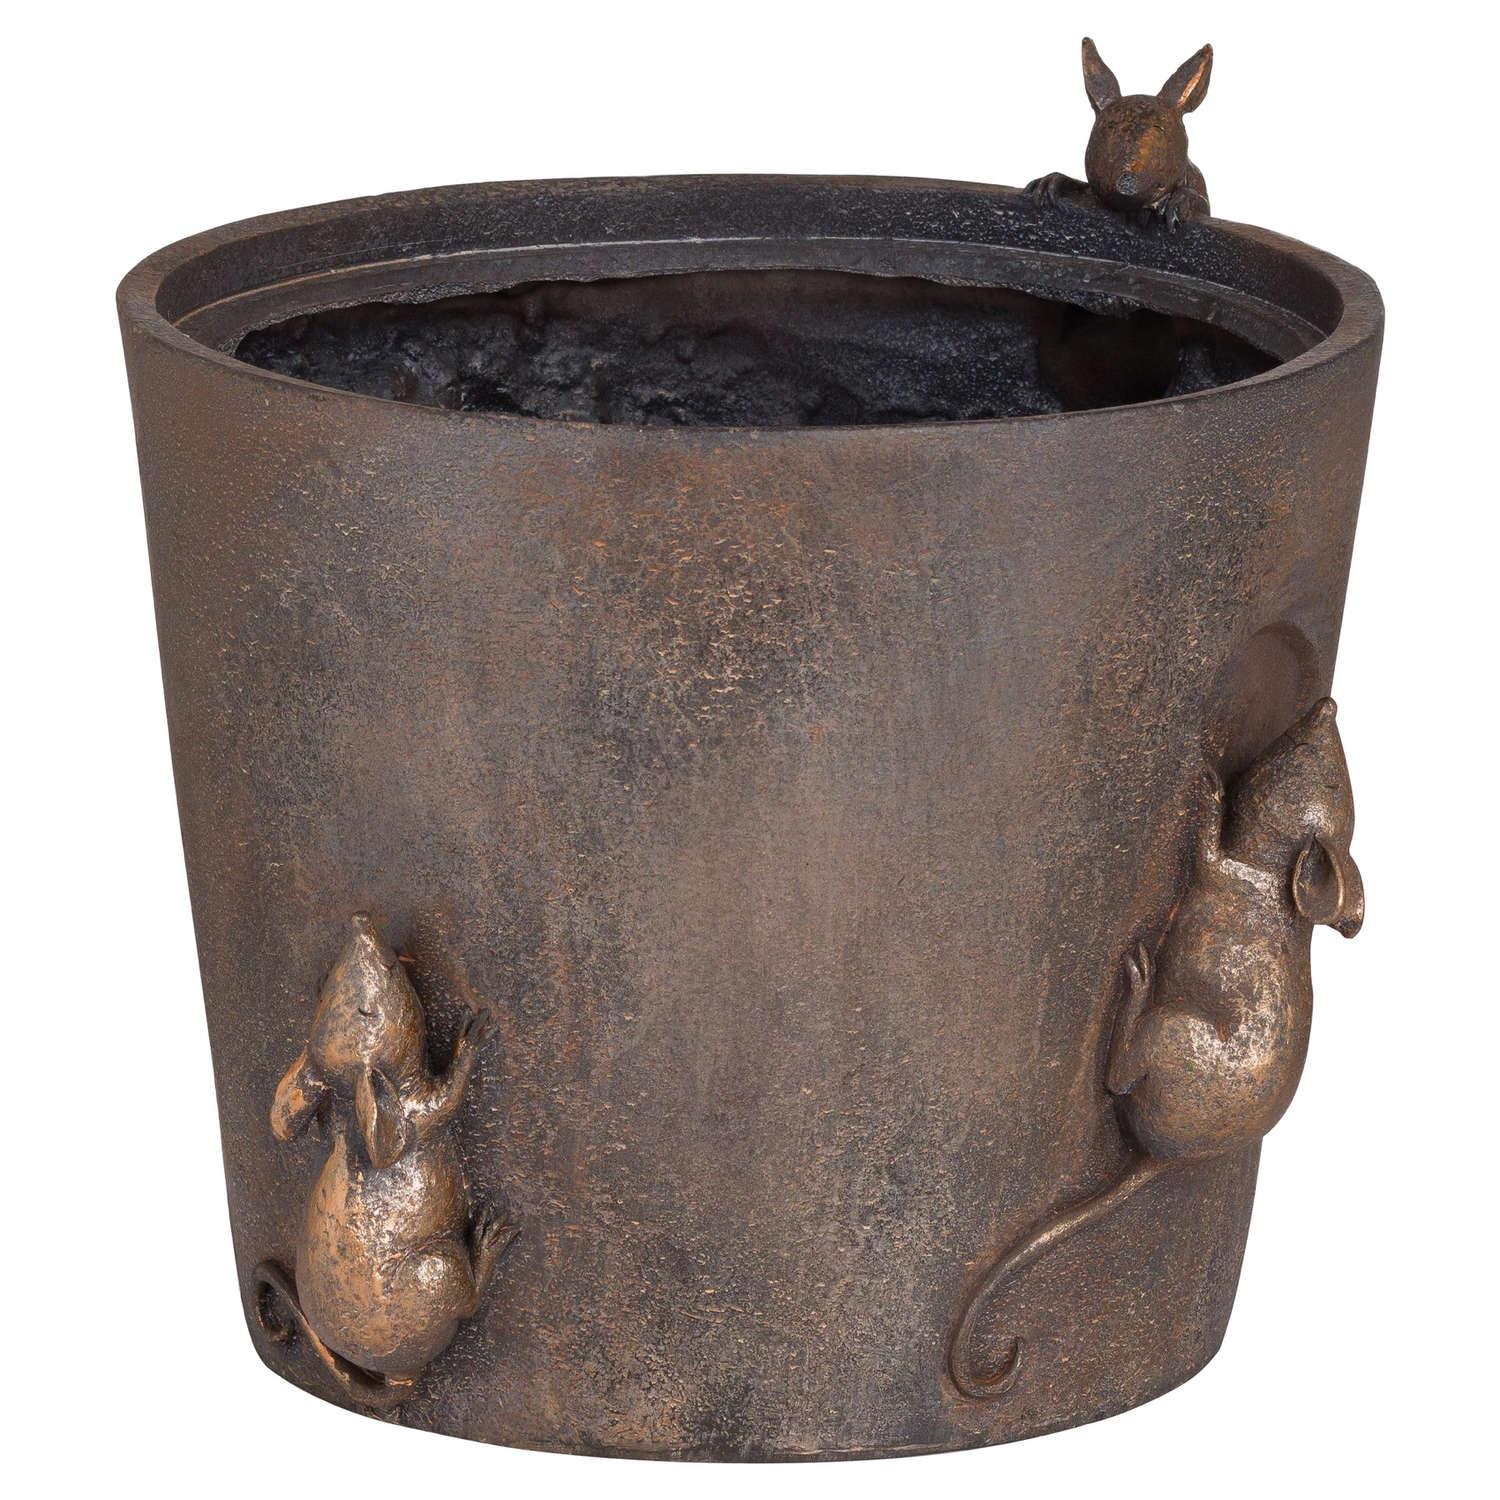 Flower Pot With Mice Detail - Vookoo Lifestyle